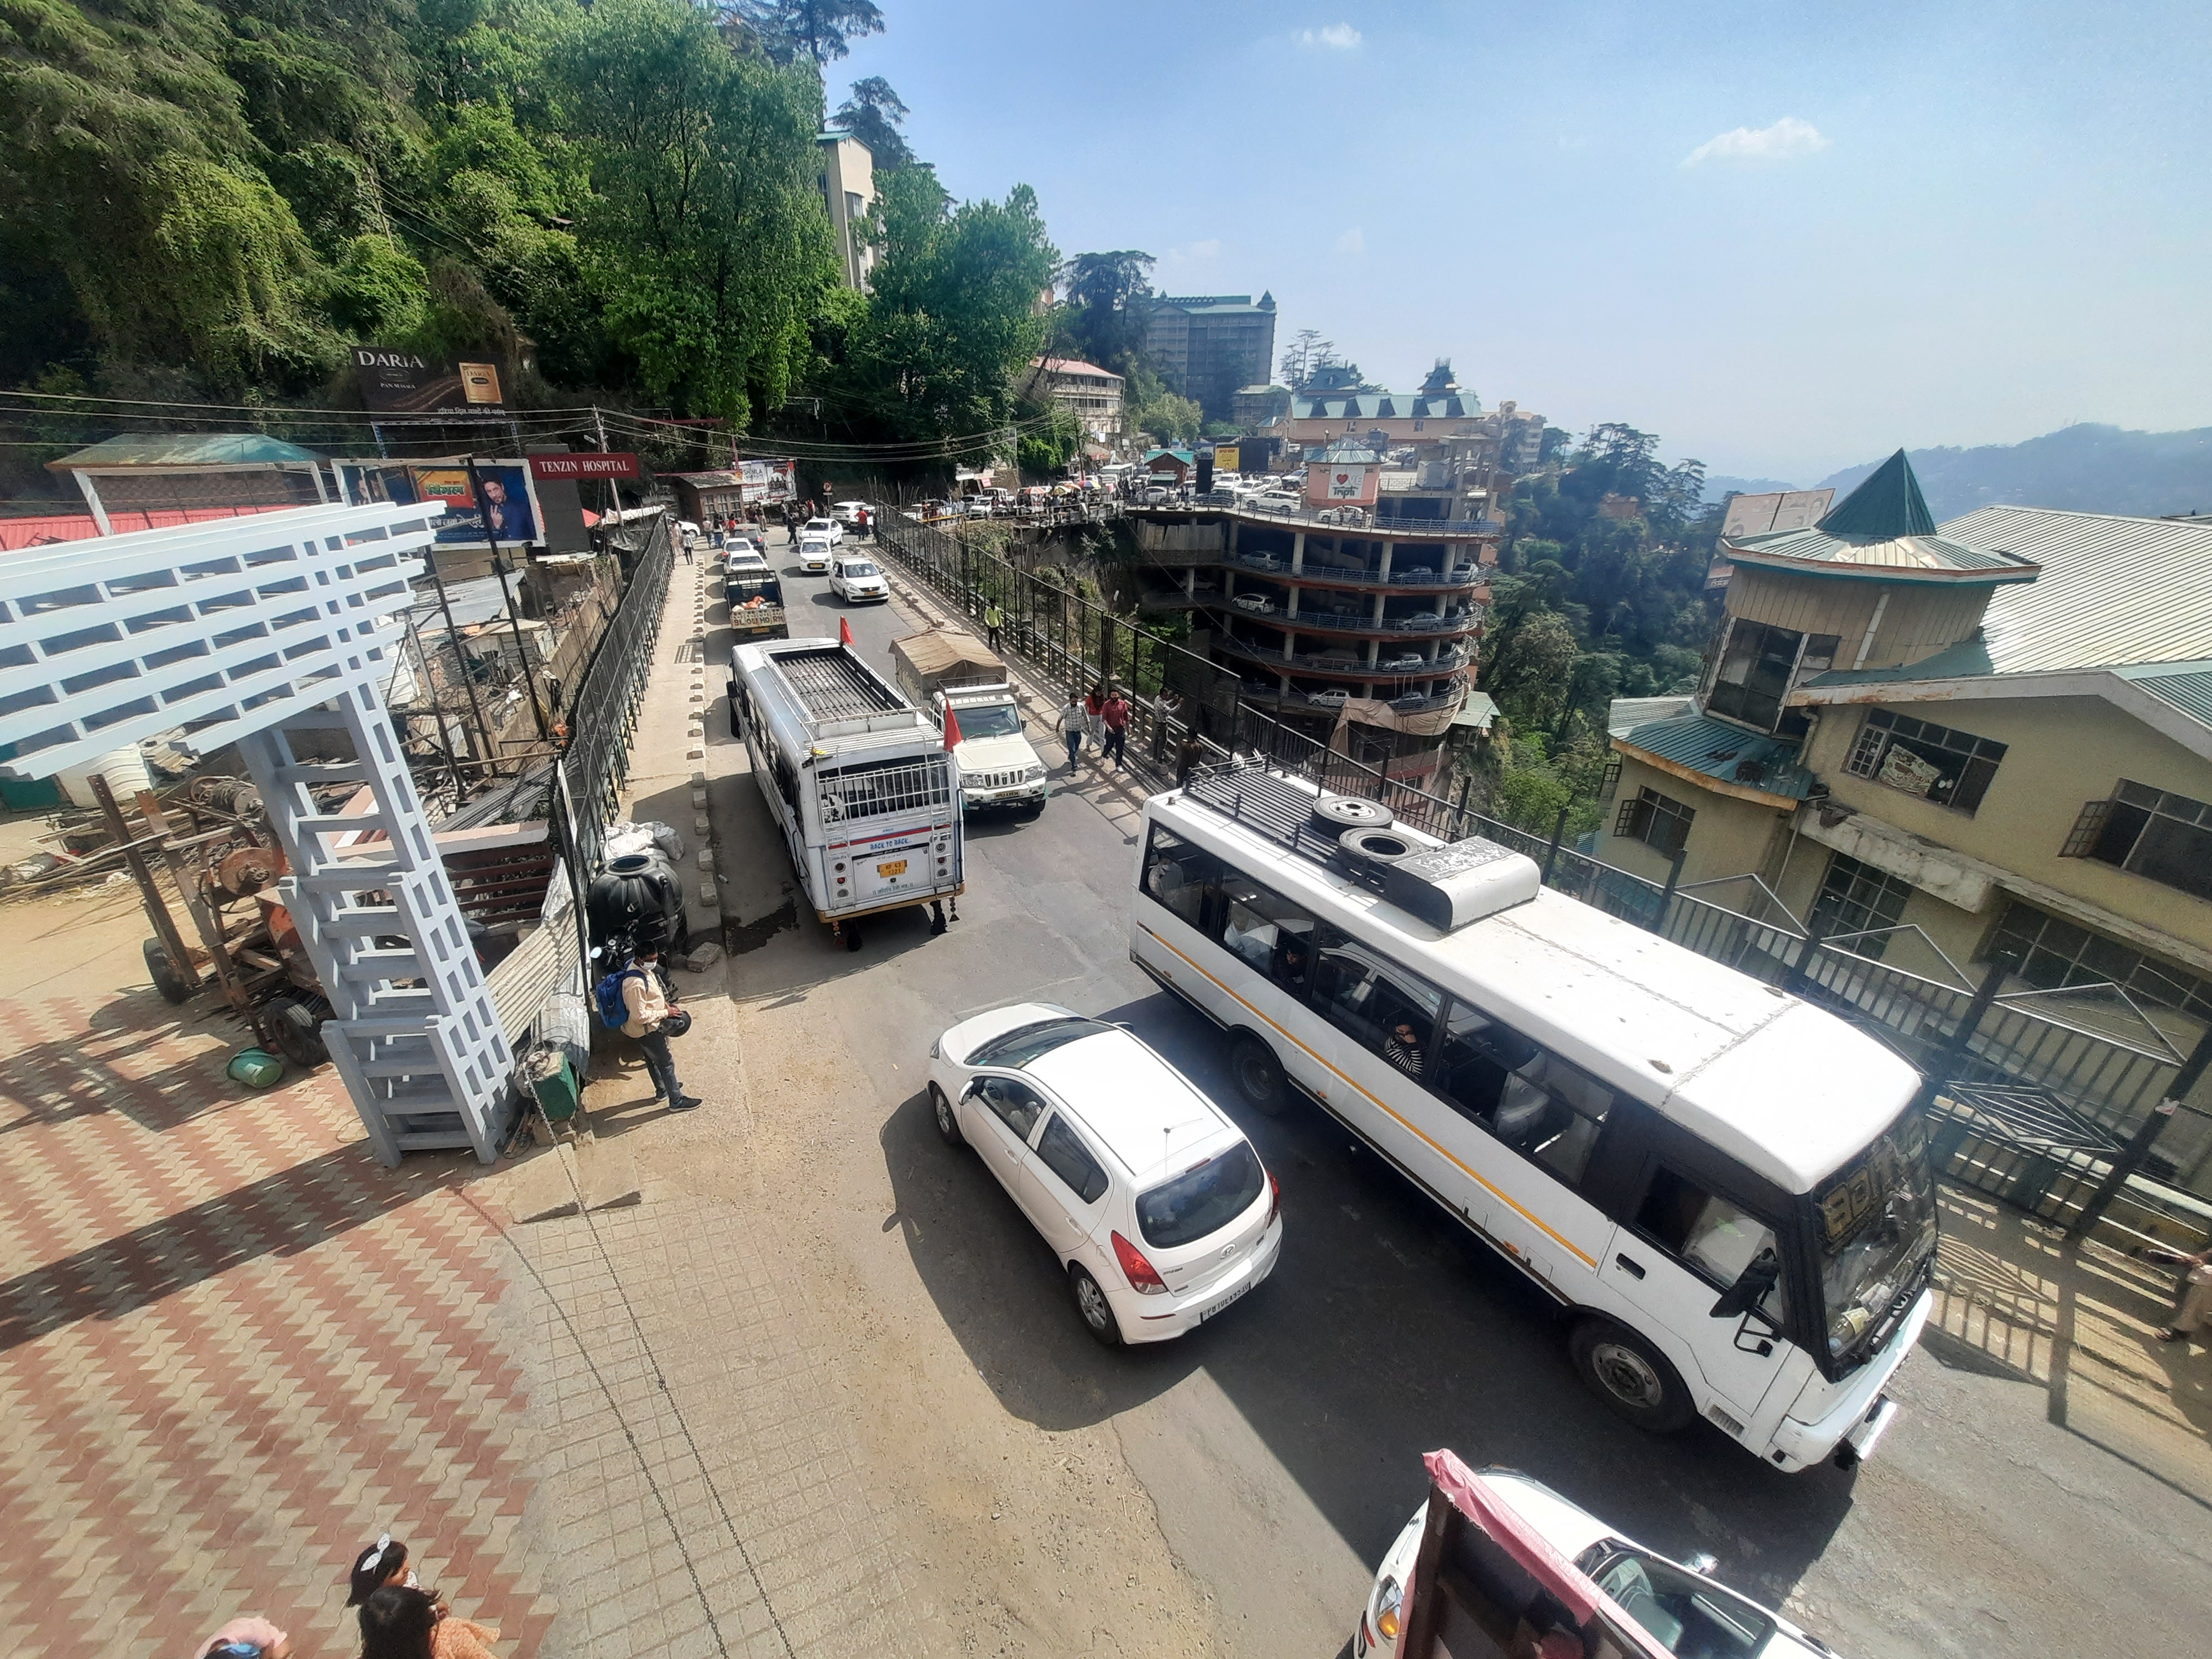 Approval sought for creating parking slots on Shimla roads